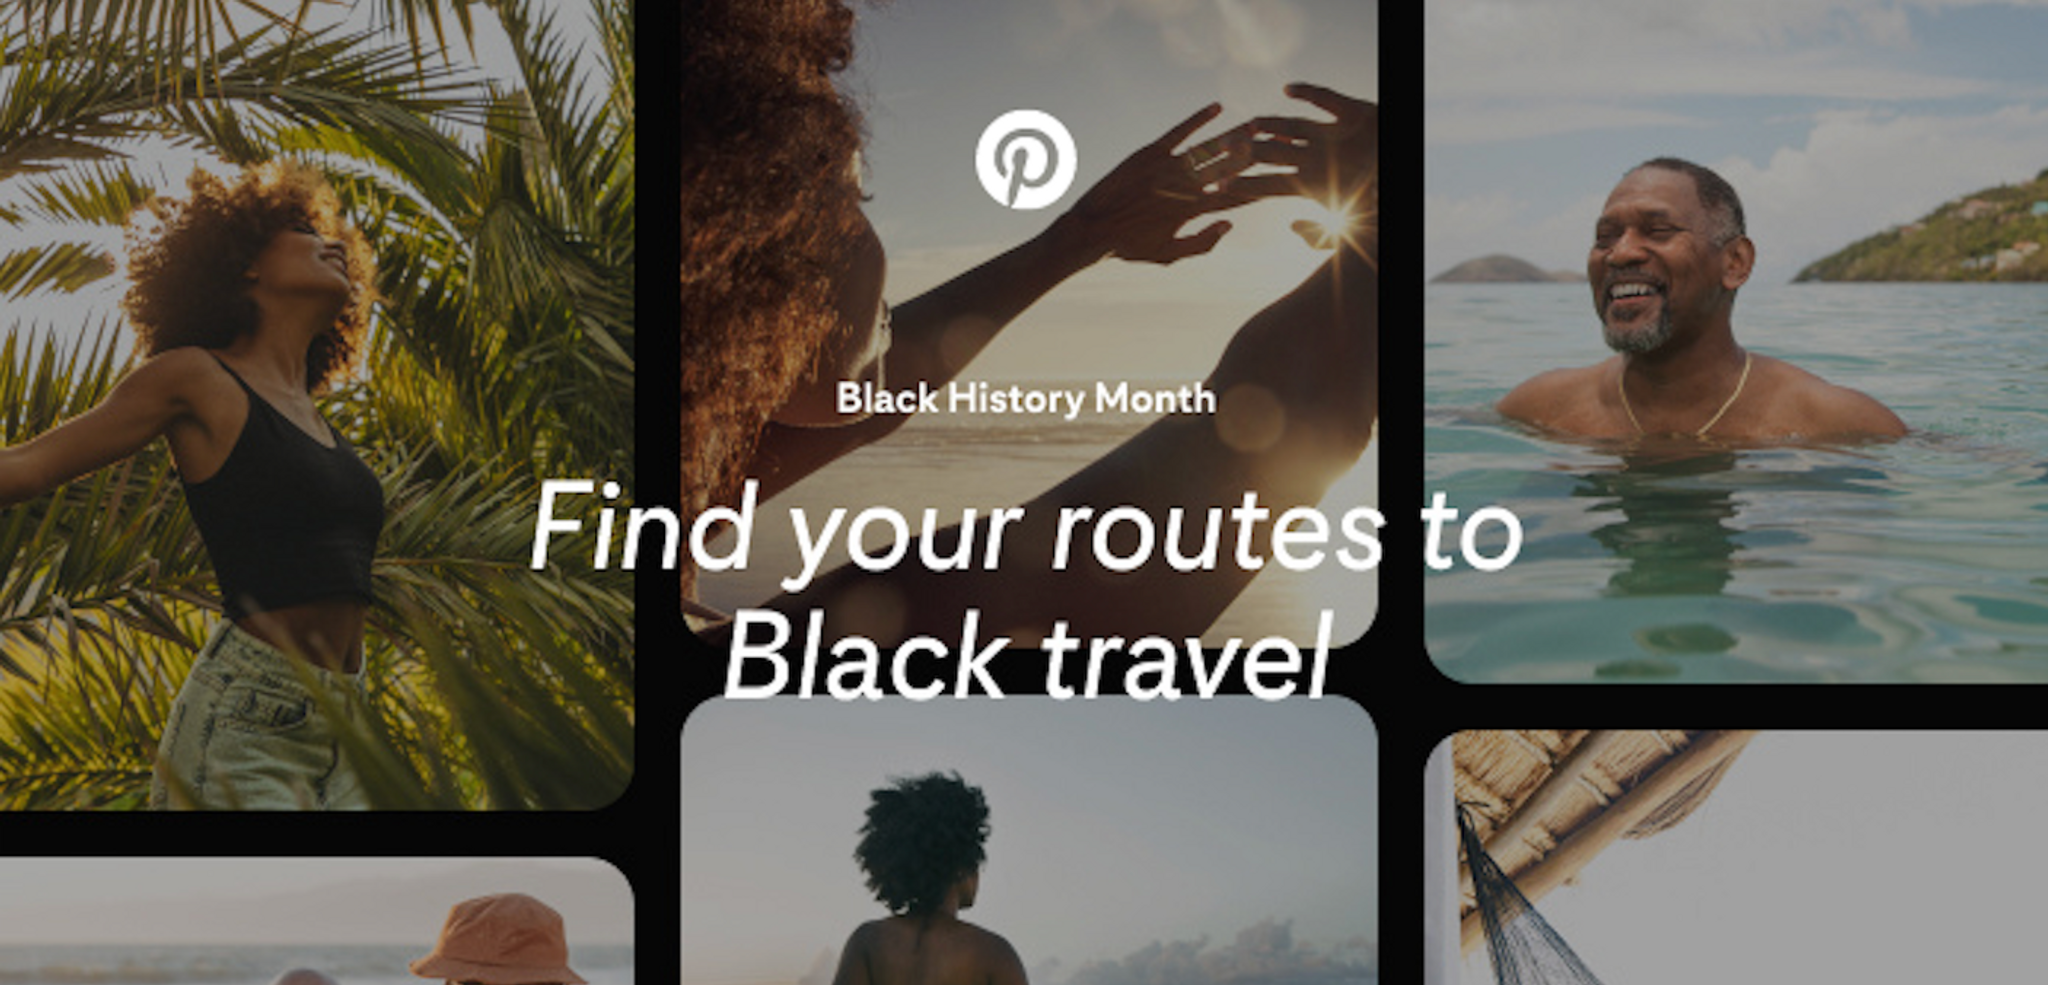 Pinterest's 'Find Your Routes' caters to Black travelers